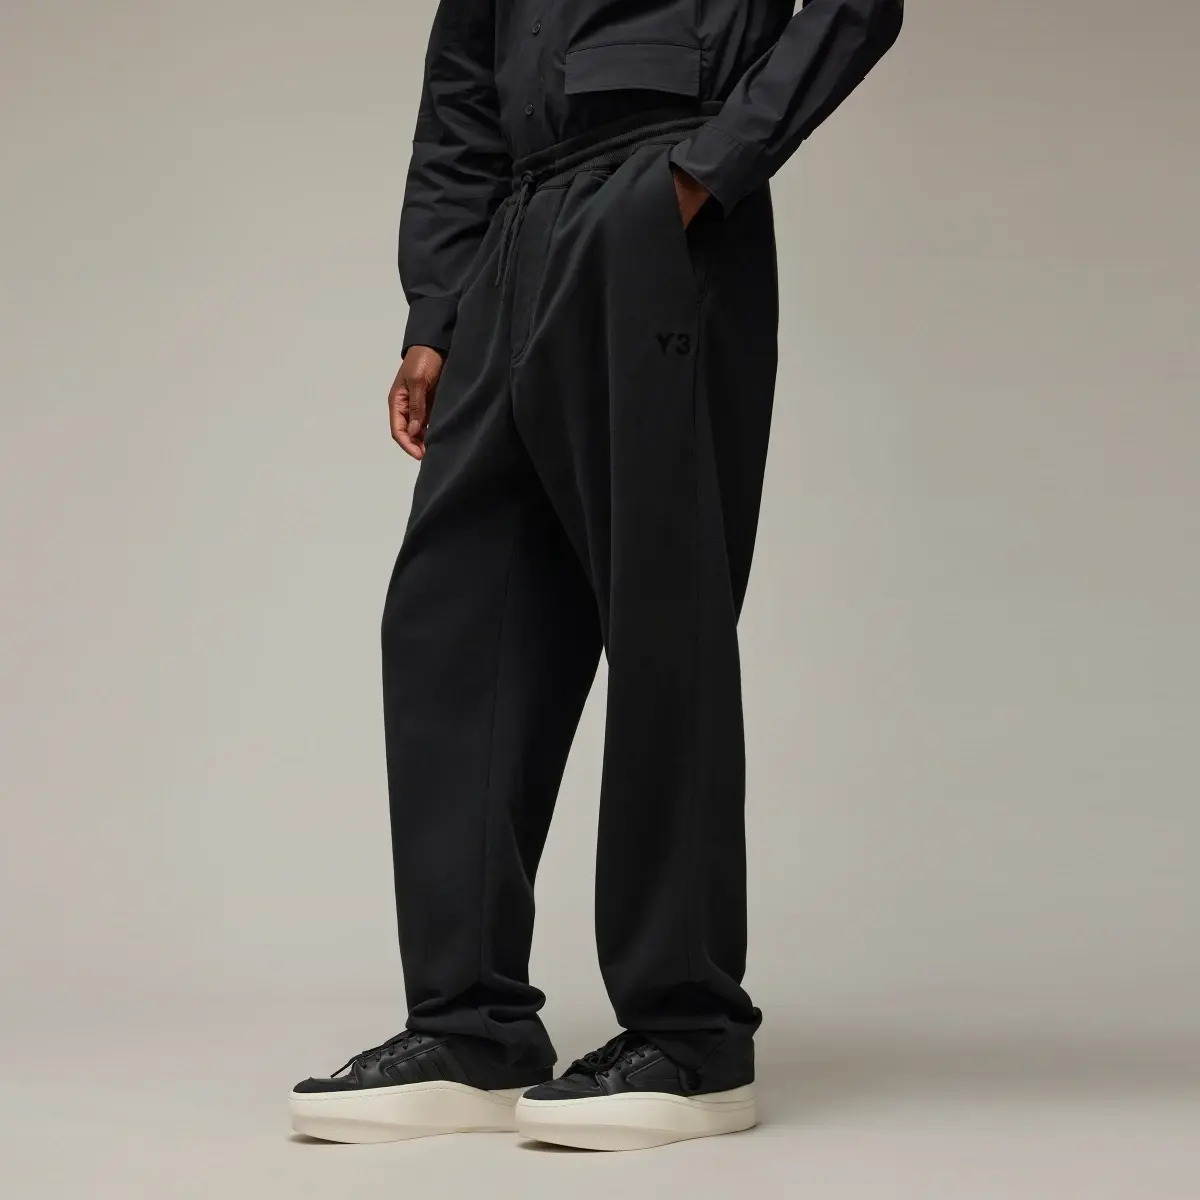 Adidas Y-3 French Terry Straight Joggers. 2